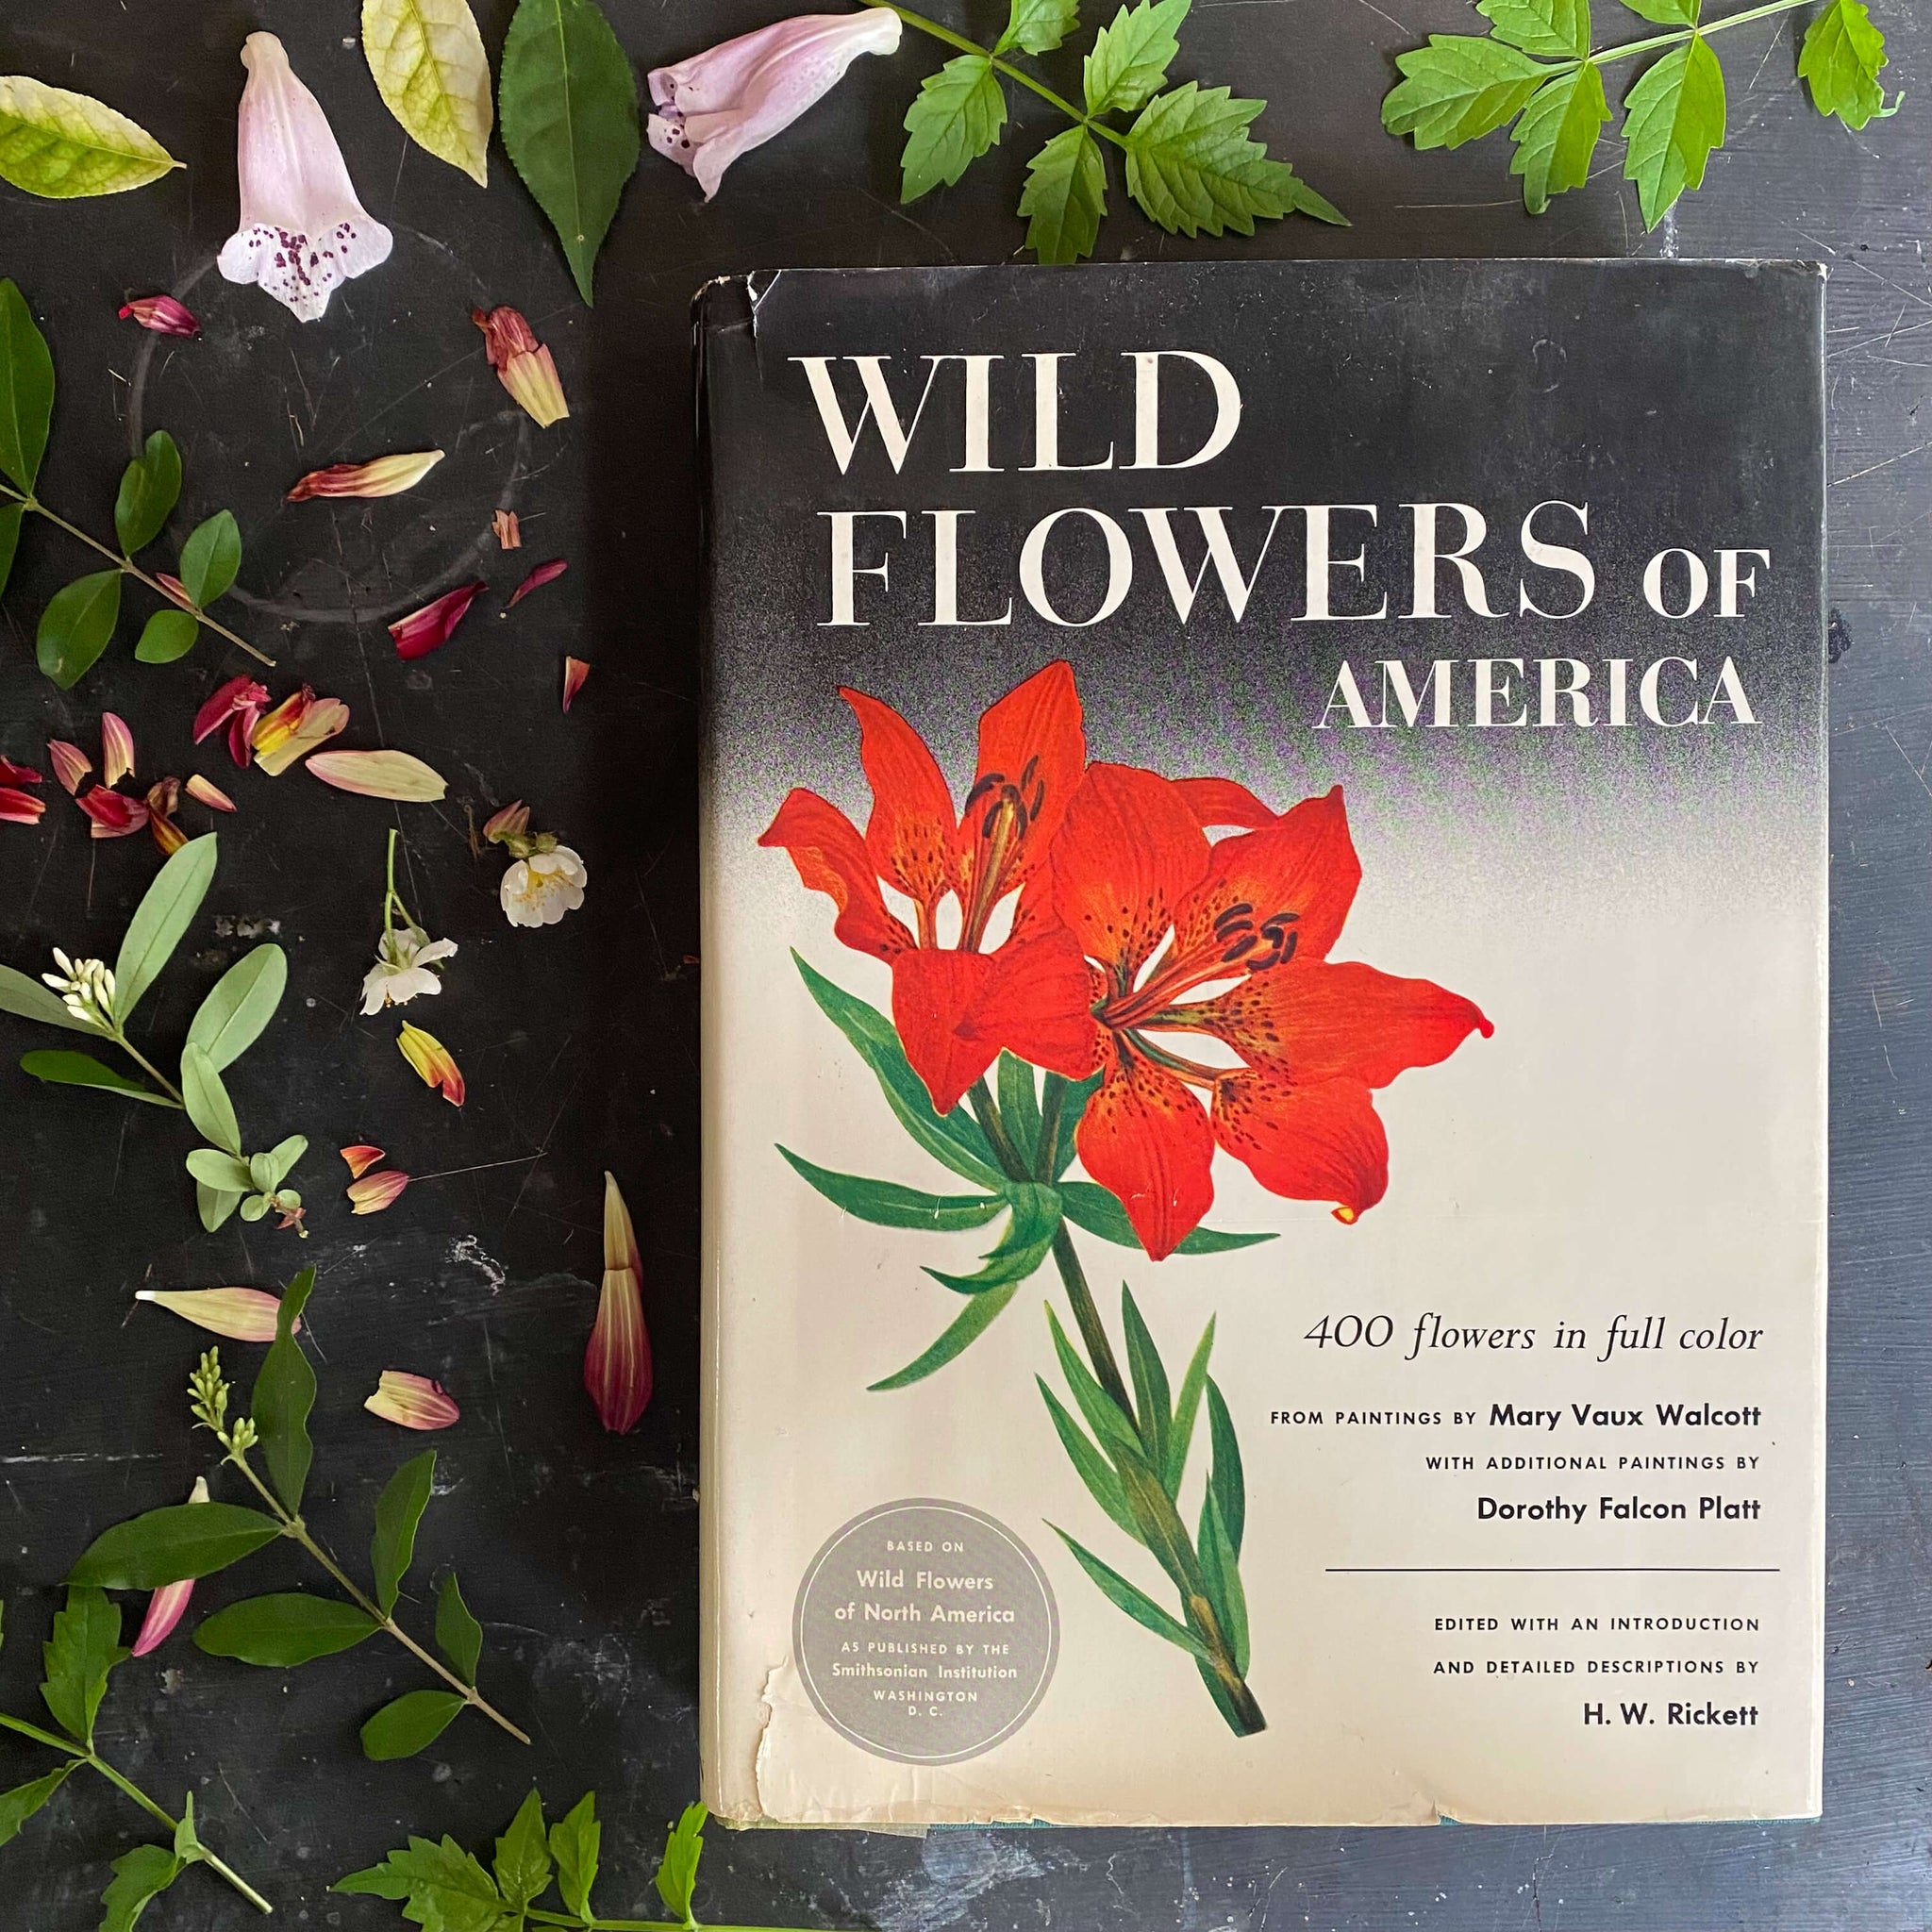 Vintage Oversized Botanical Coffee Table Book - Wild Flowers of America by Mary Vaux Walcott & Dorothy Falcon Platt - 1975 Edition, 12th Printing